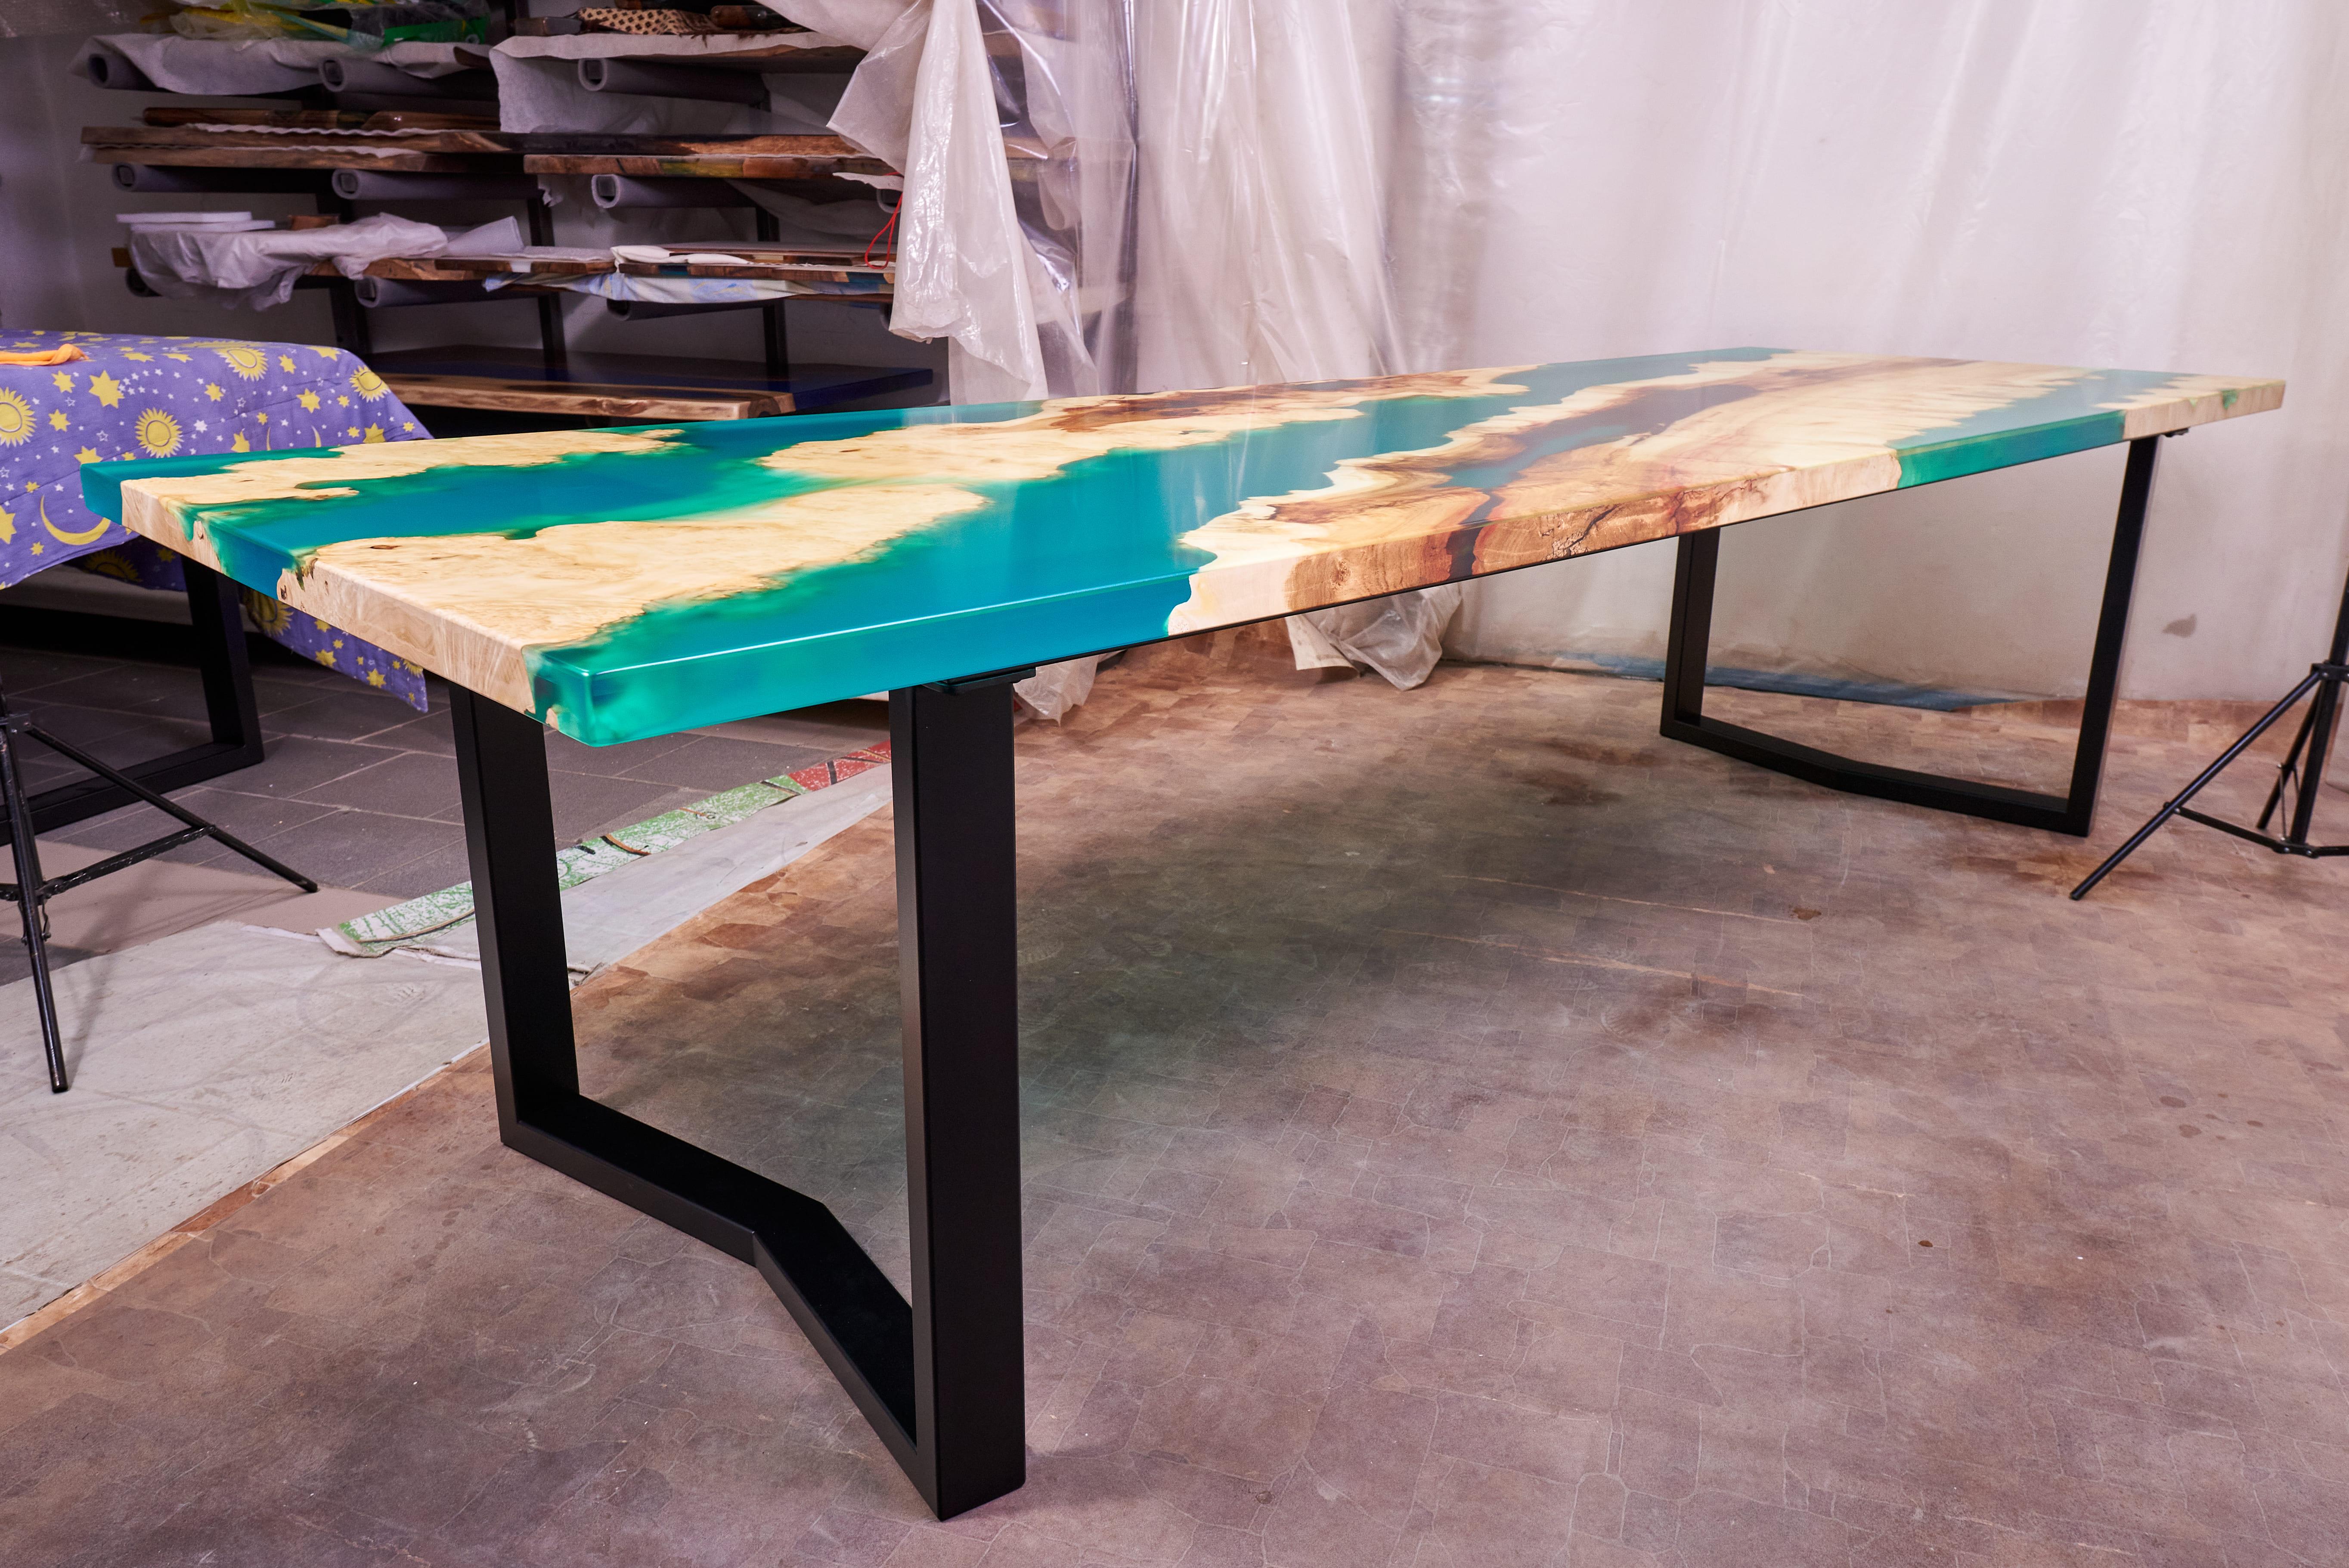 Introducing the awe-inspiring Ancient Maple Burl Large Dining Table with Emerald Resin—a truly one-of-a-kind masterpiece crafted by the hands of great artists. This magnificent table brings together the timeless beauty of ancient maple burl wood and